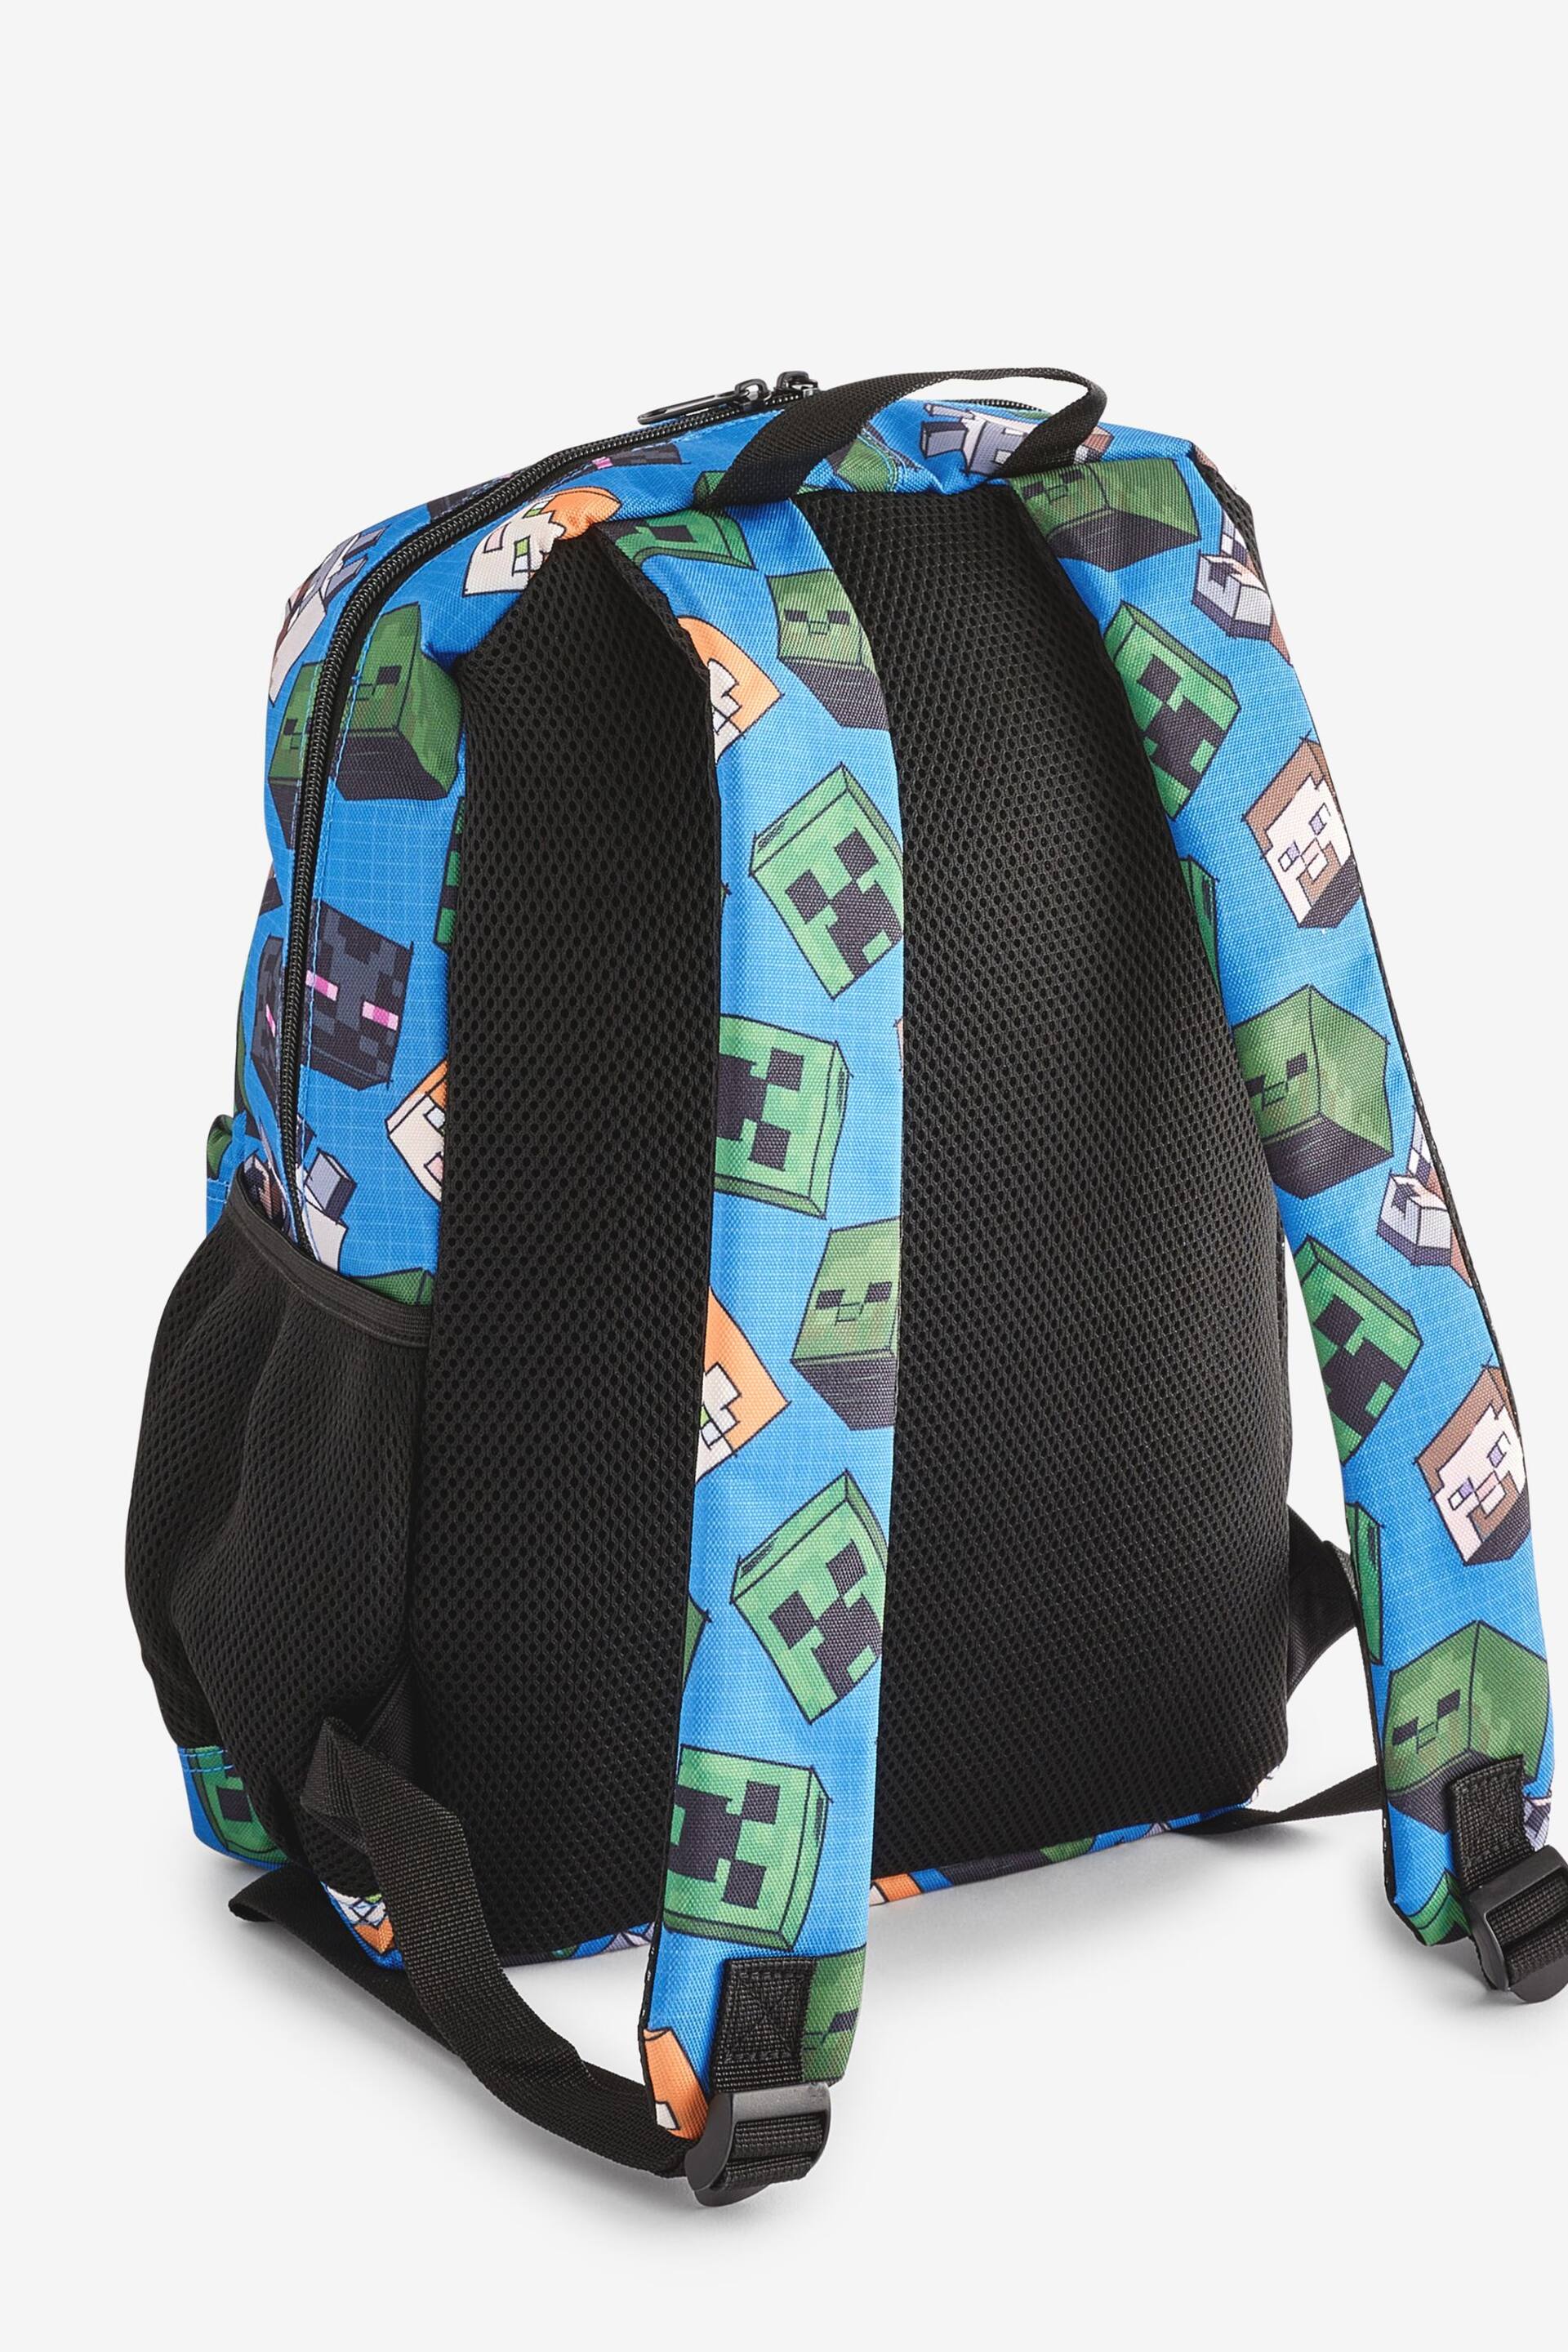 Minecraft Blue Backpack - Image 5 of 5